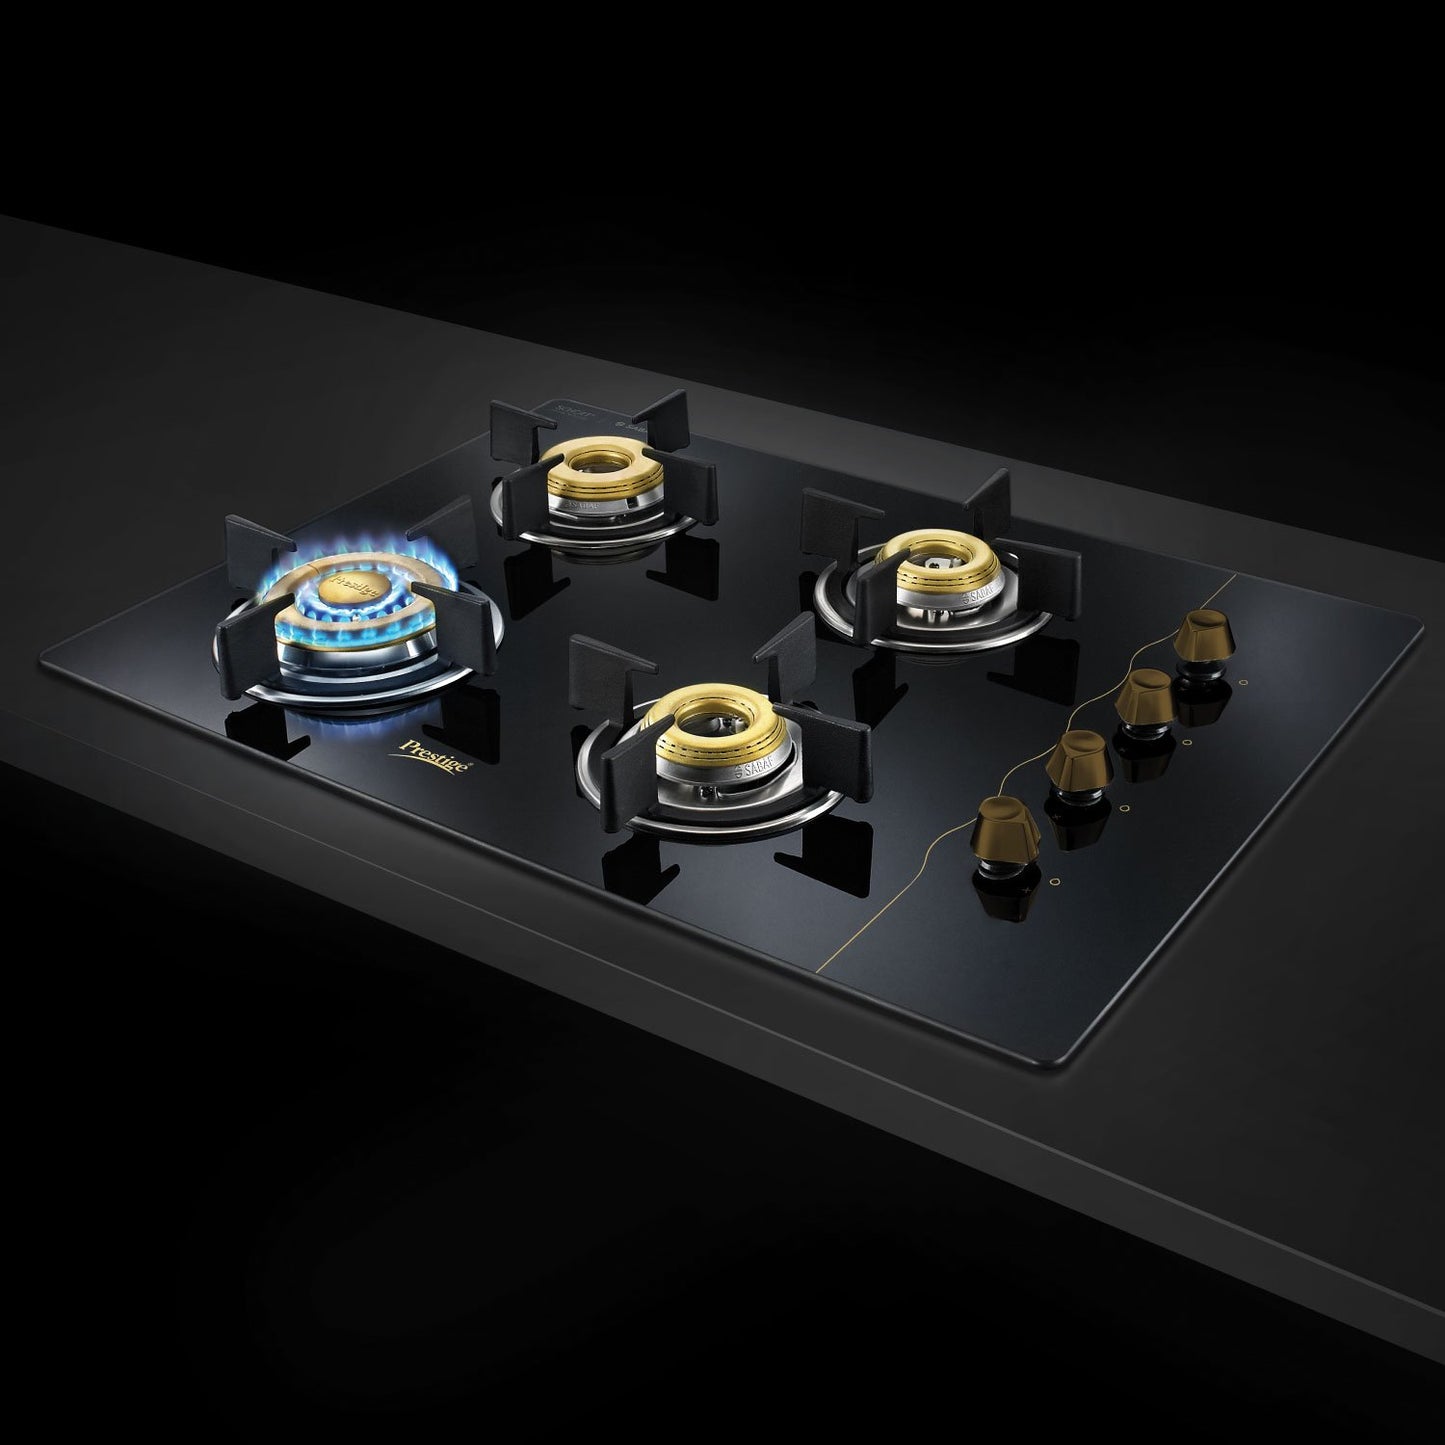 Prestige Gold Hobtop PHTG 04 AI Schott Glass Top Hob Gas Stove with One-Touch Advanced Auto-Ignition, 4 Burner